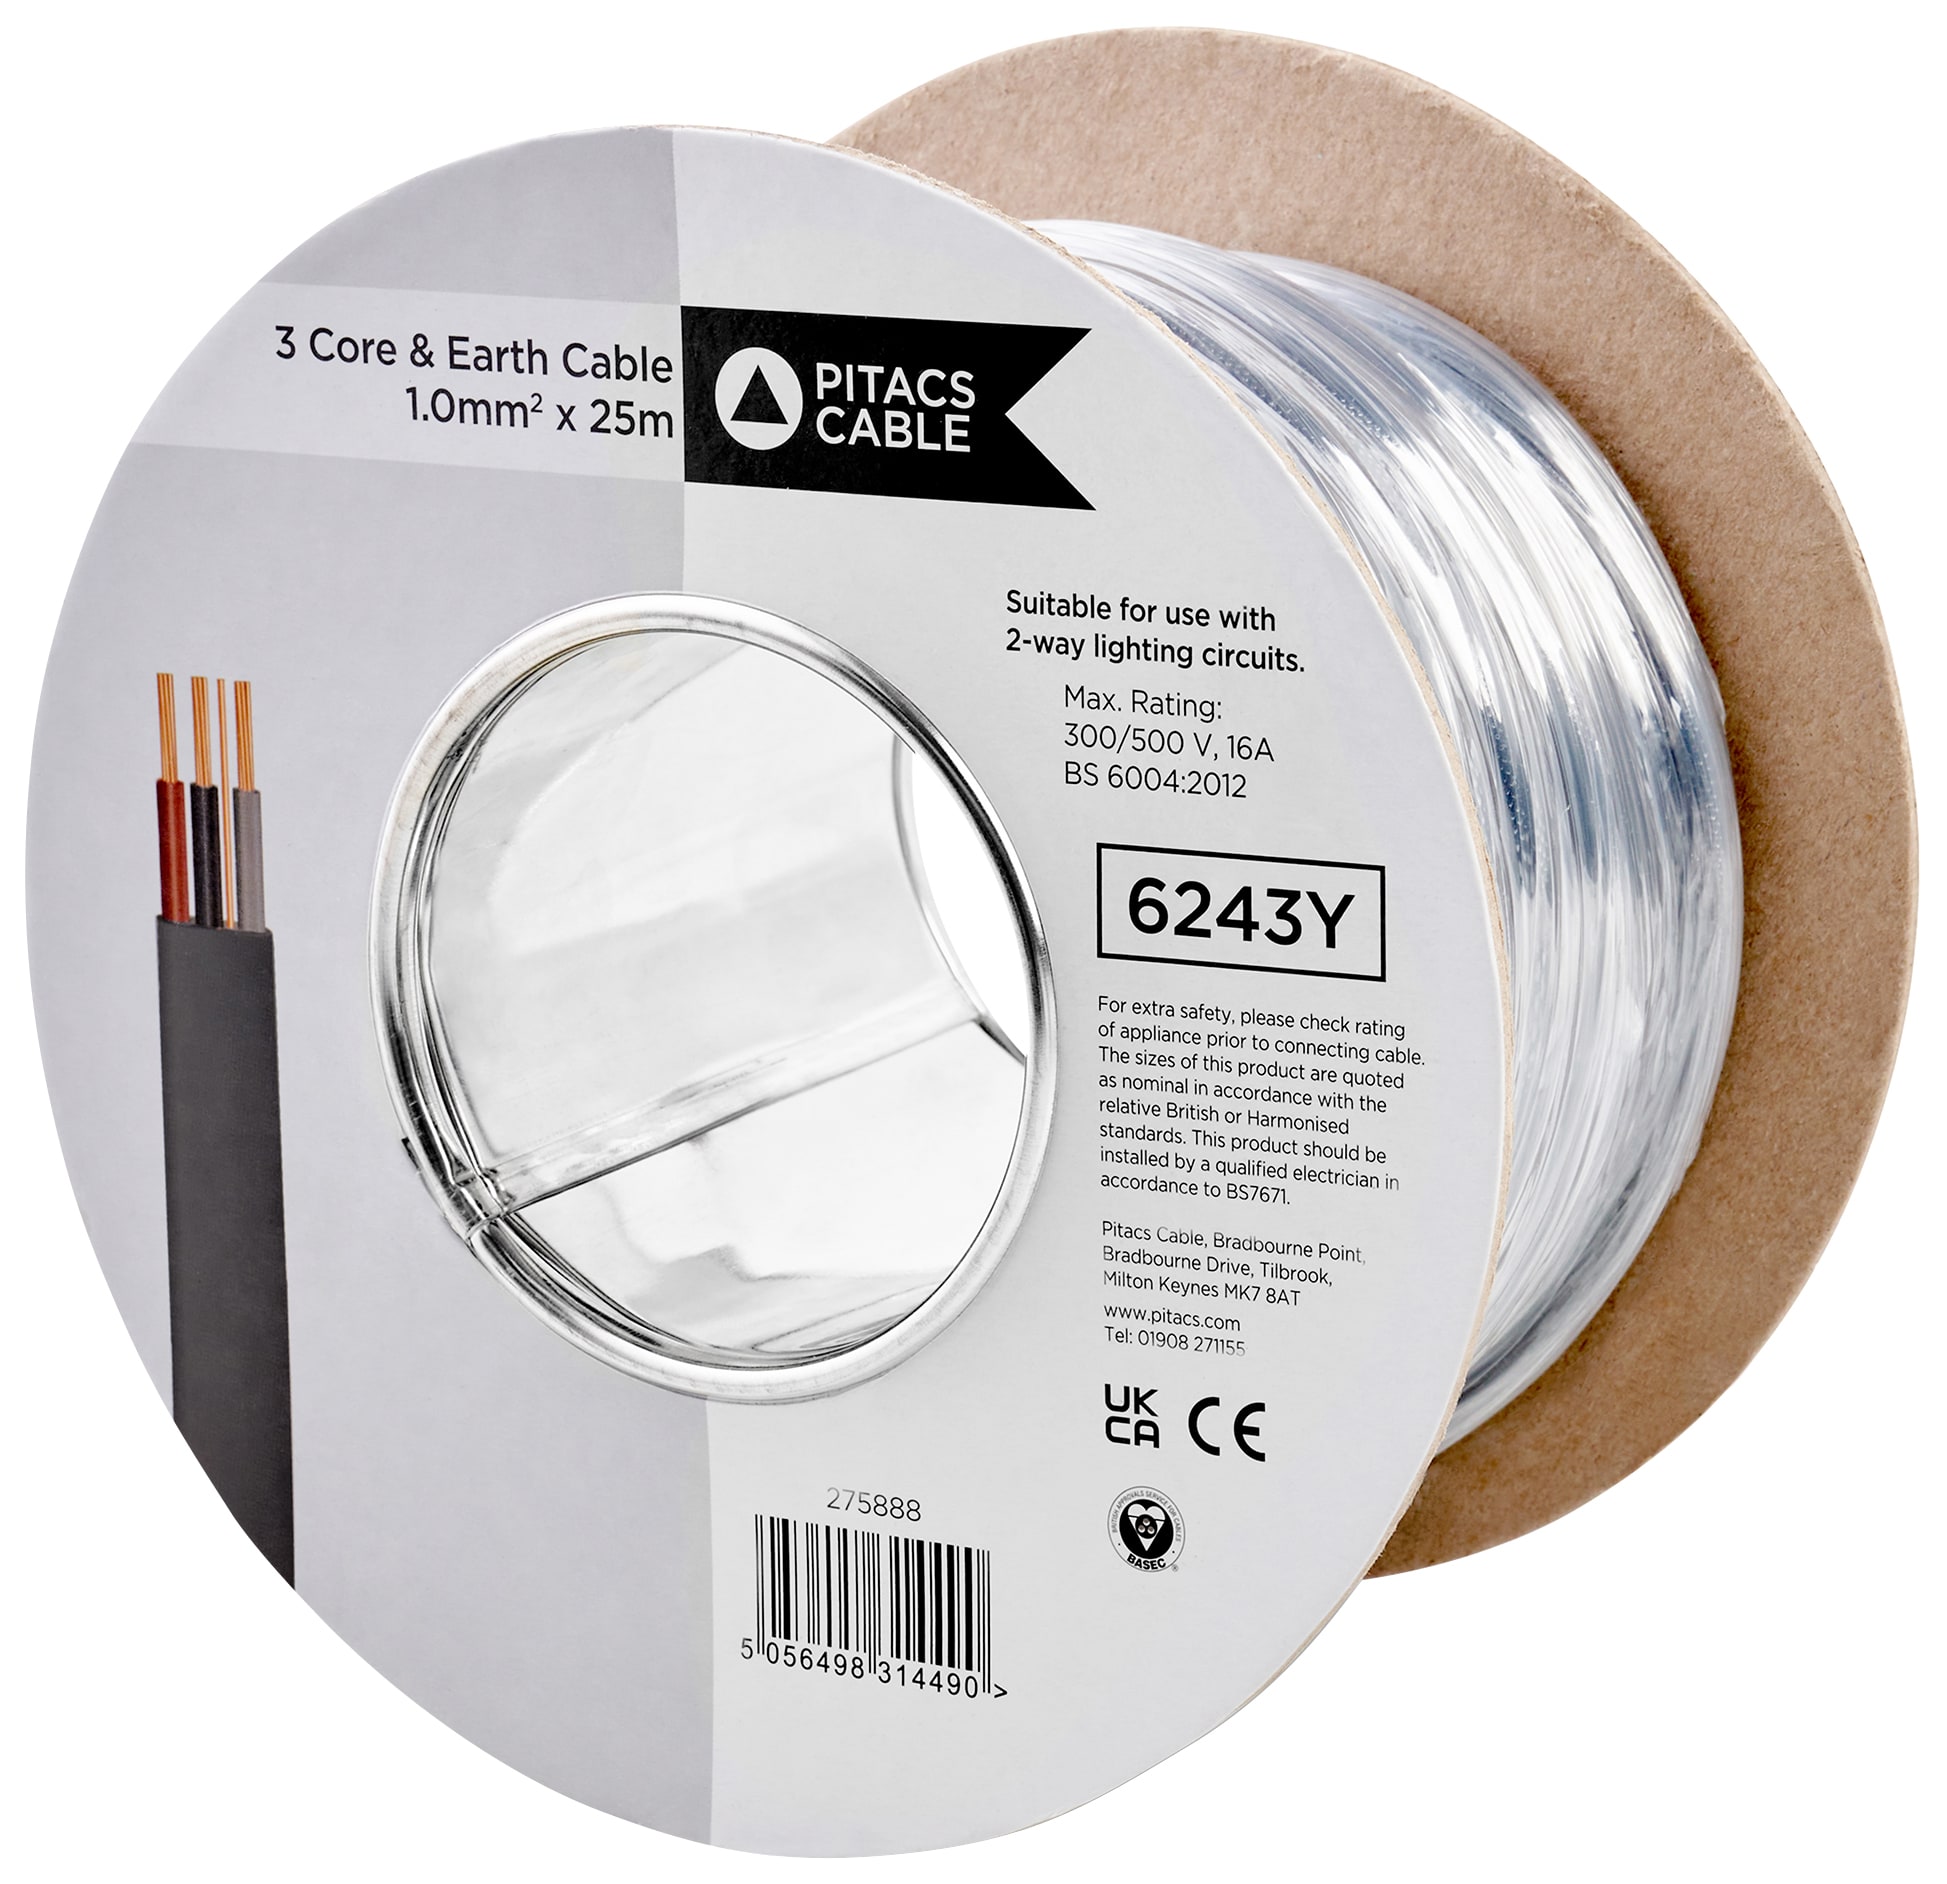 3 Core 6243Y Grey Earth Cable - 1mm2